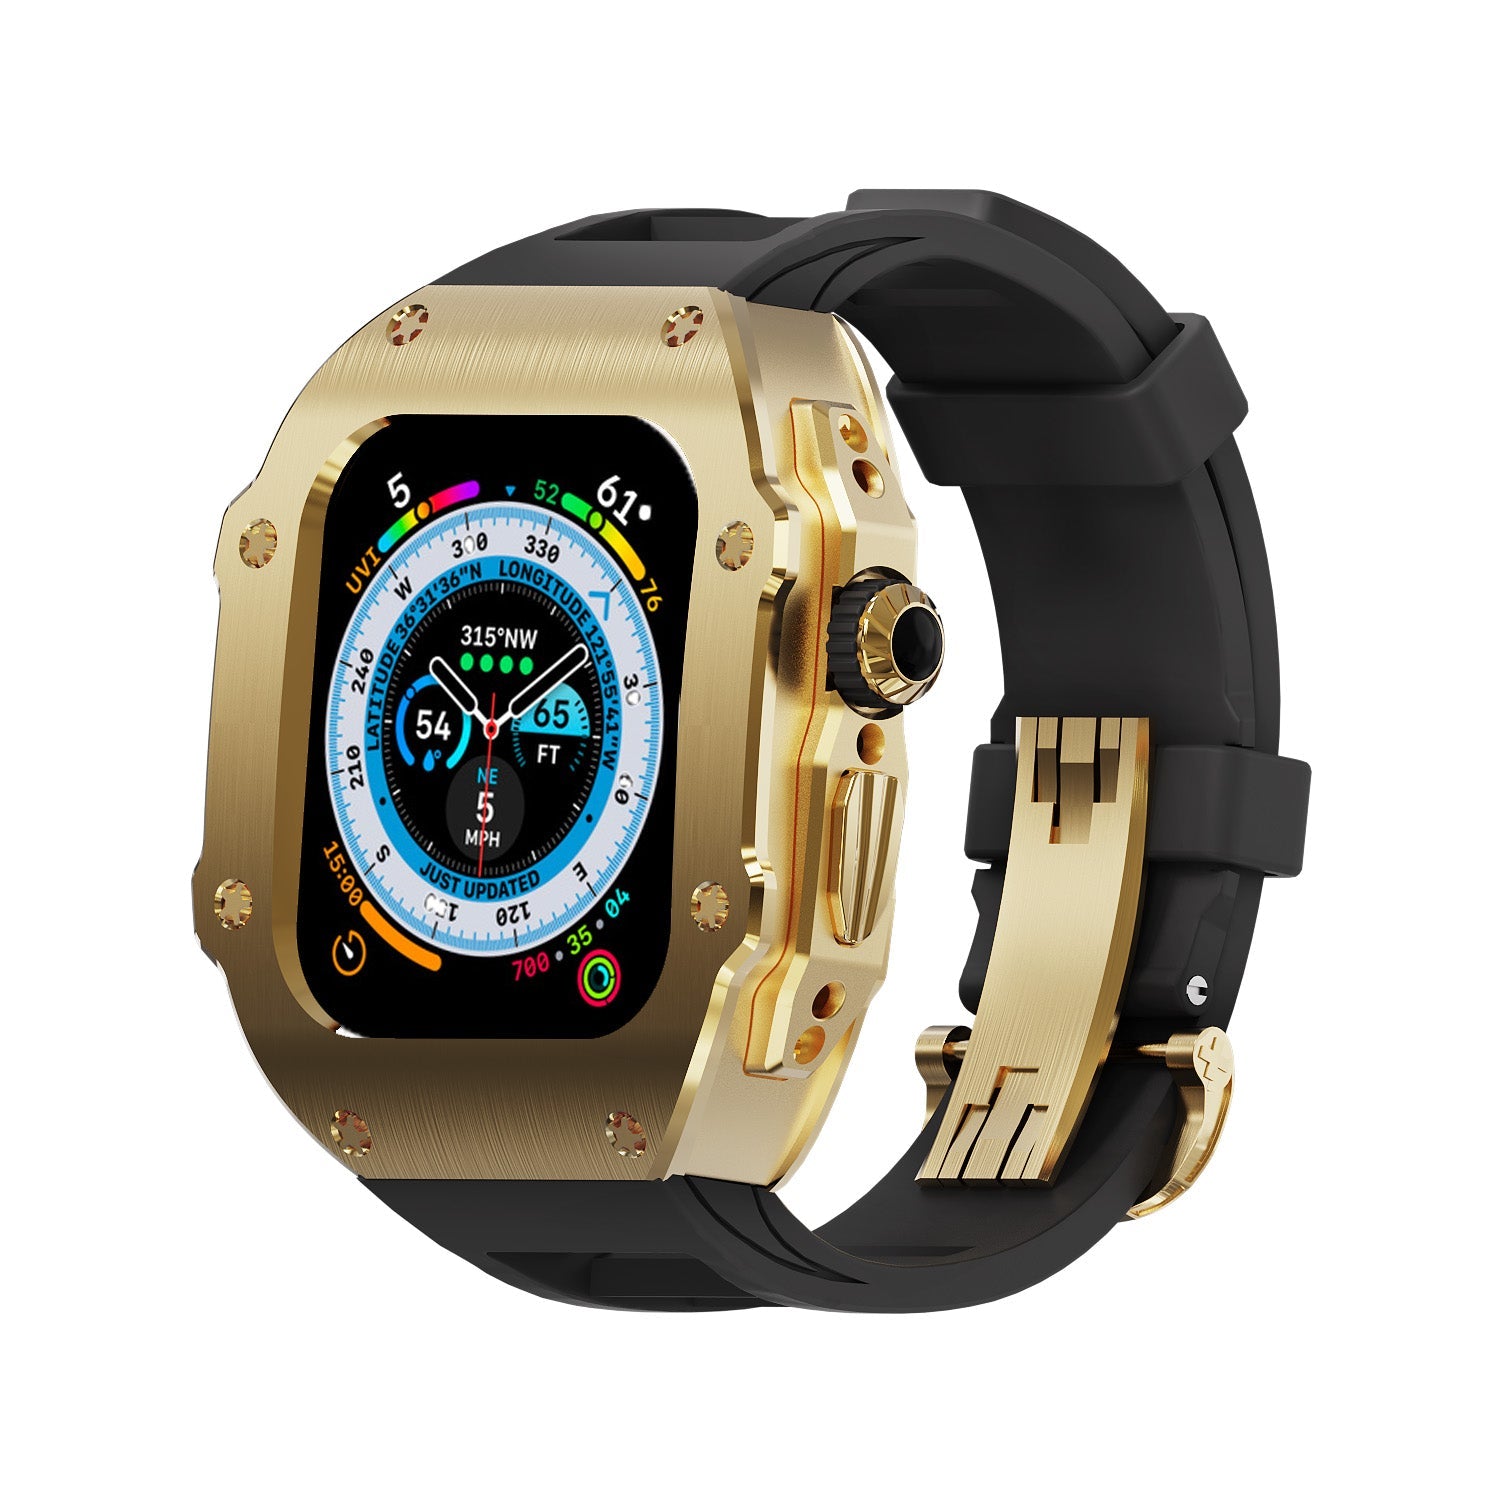 49mm Apple watch Gold stainless steel case - Gold & Cherry